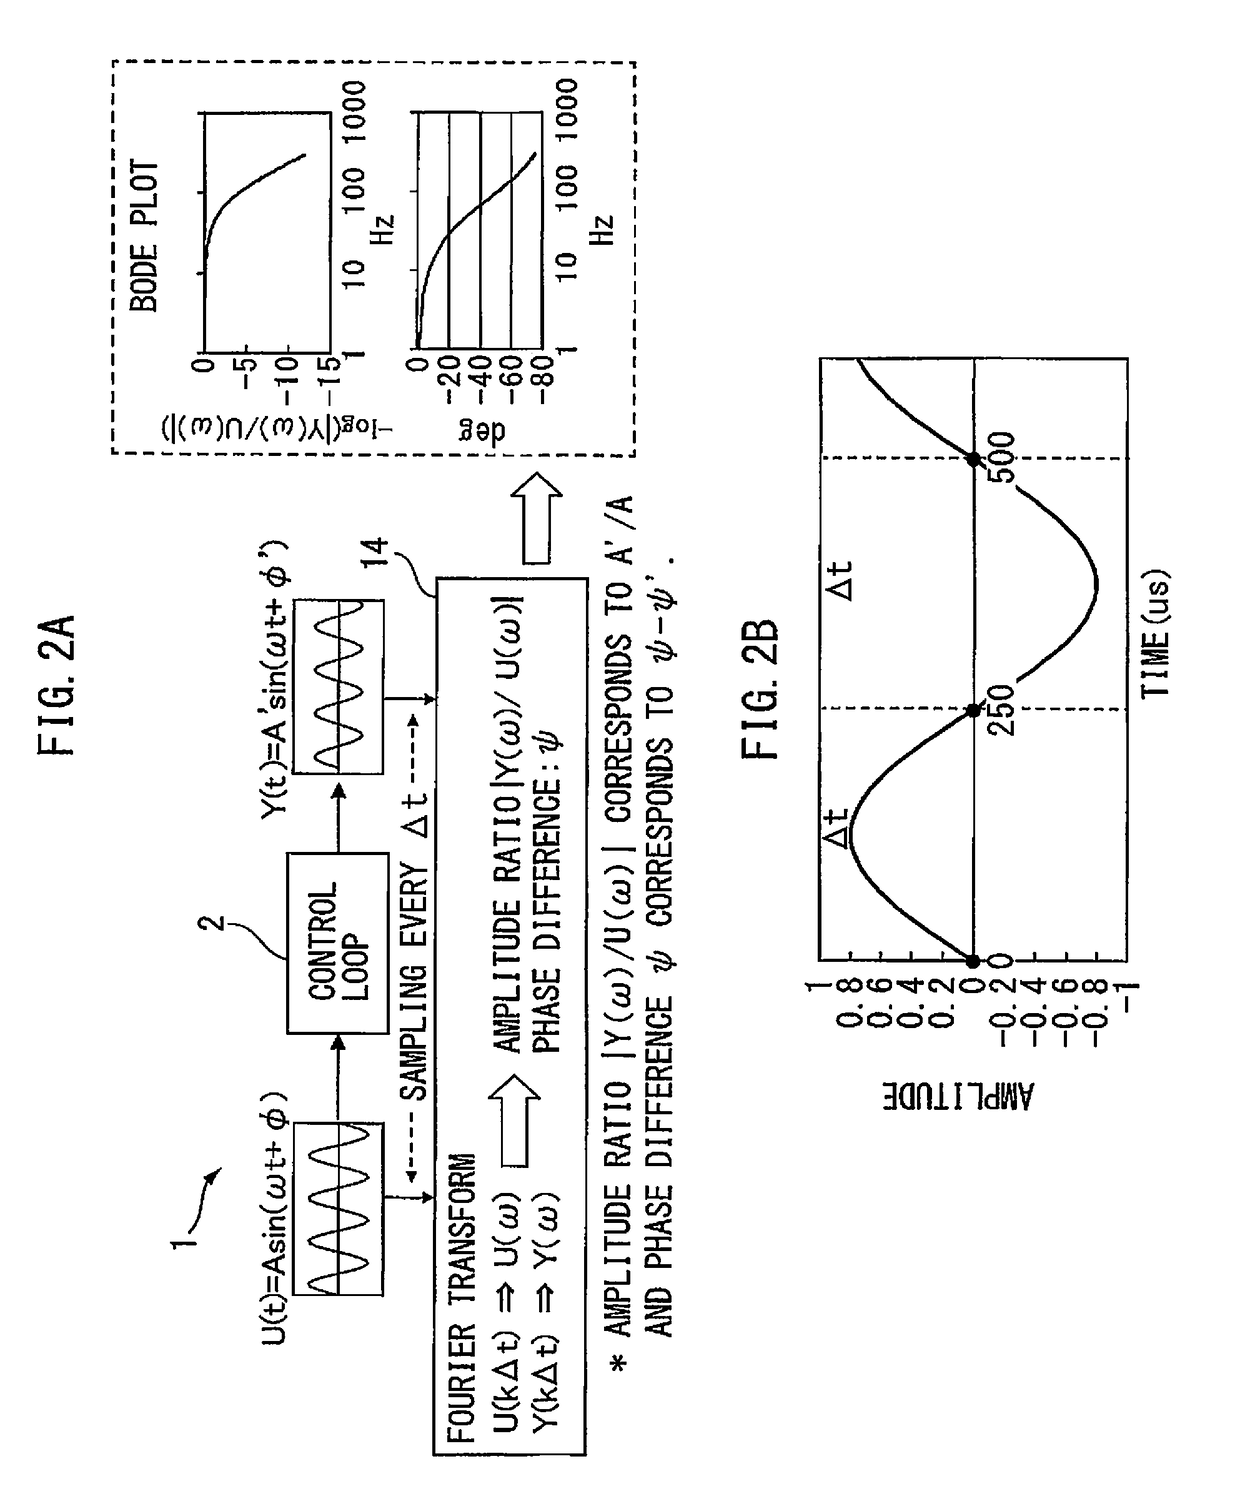 Numerical control device having function of calculating frequency characteristic of control loop